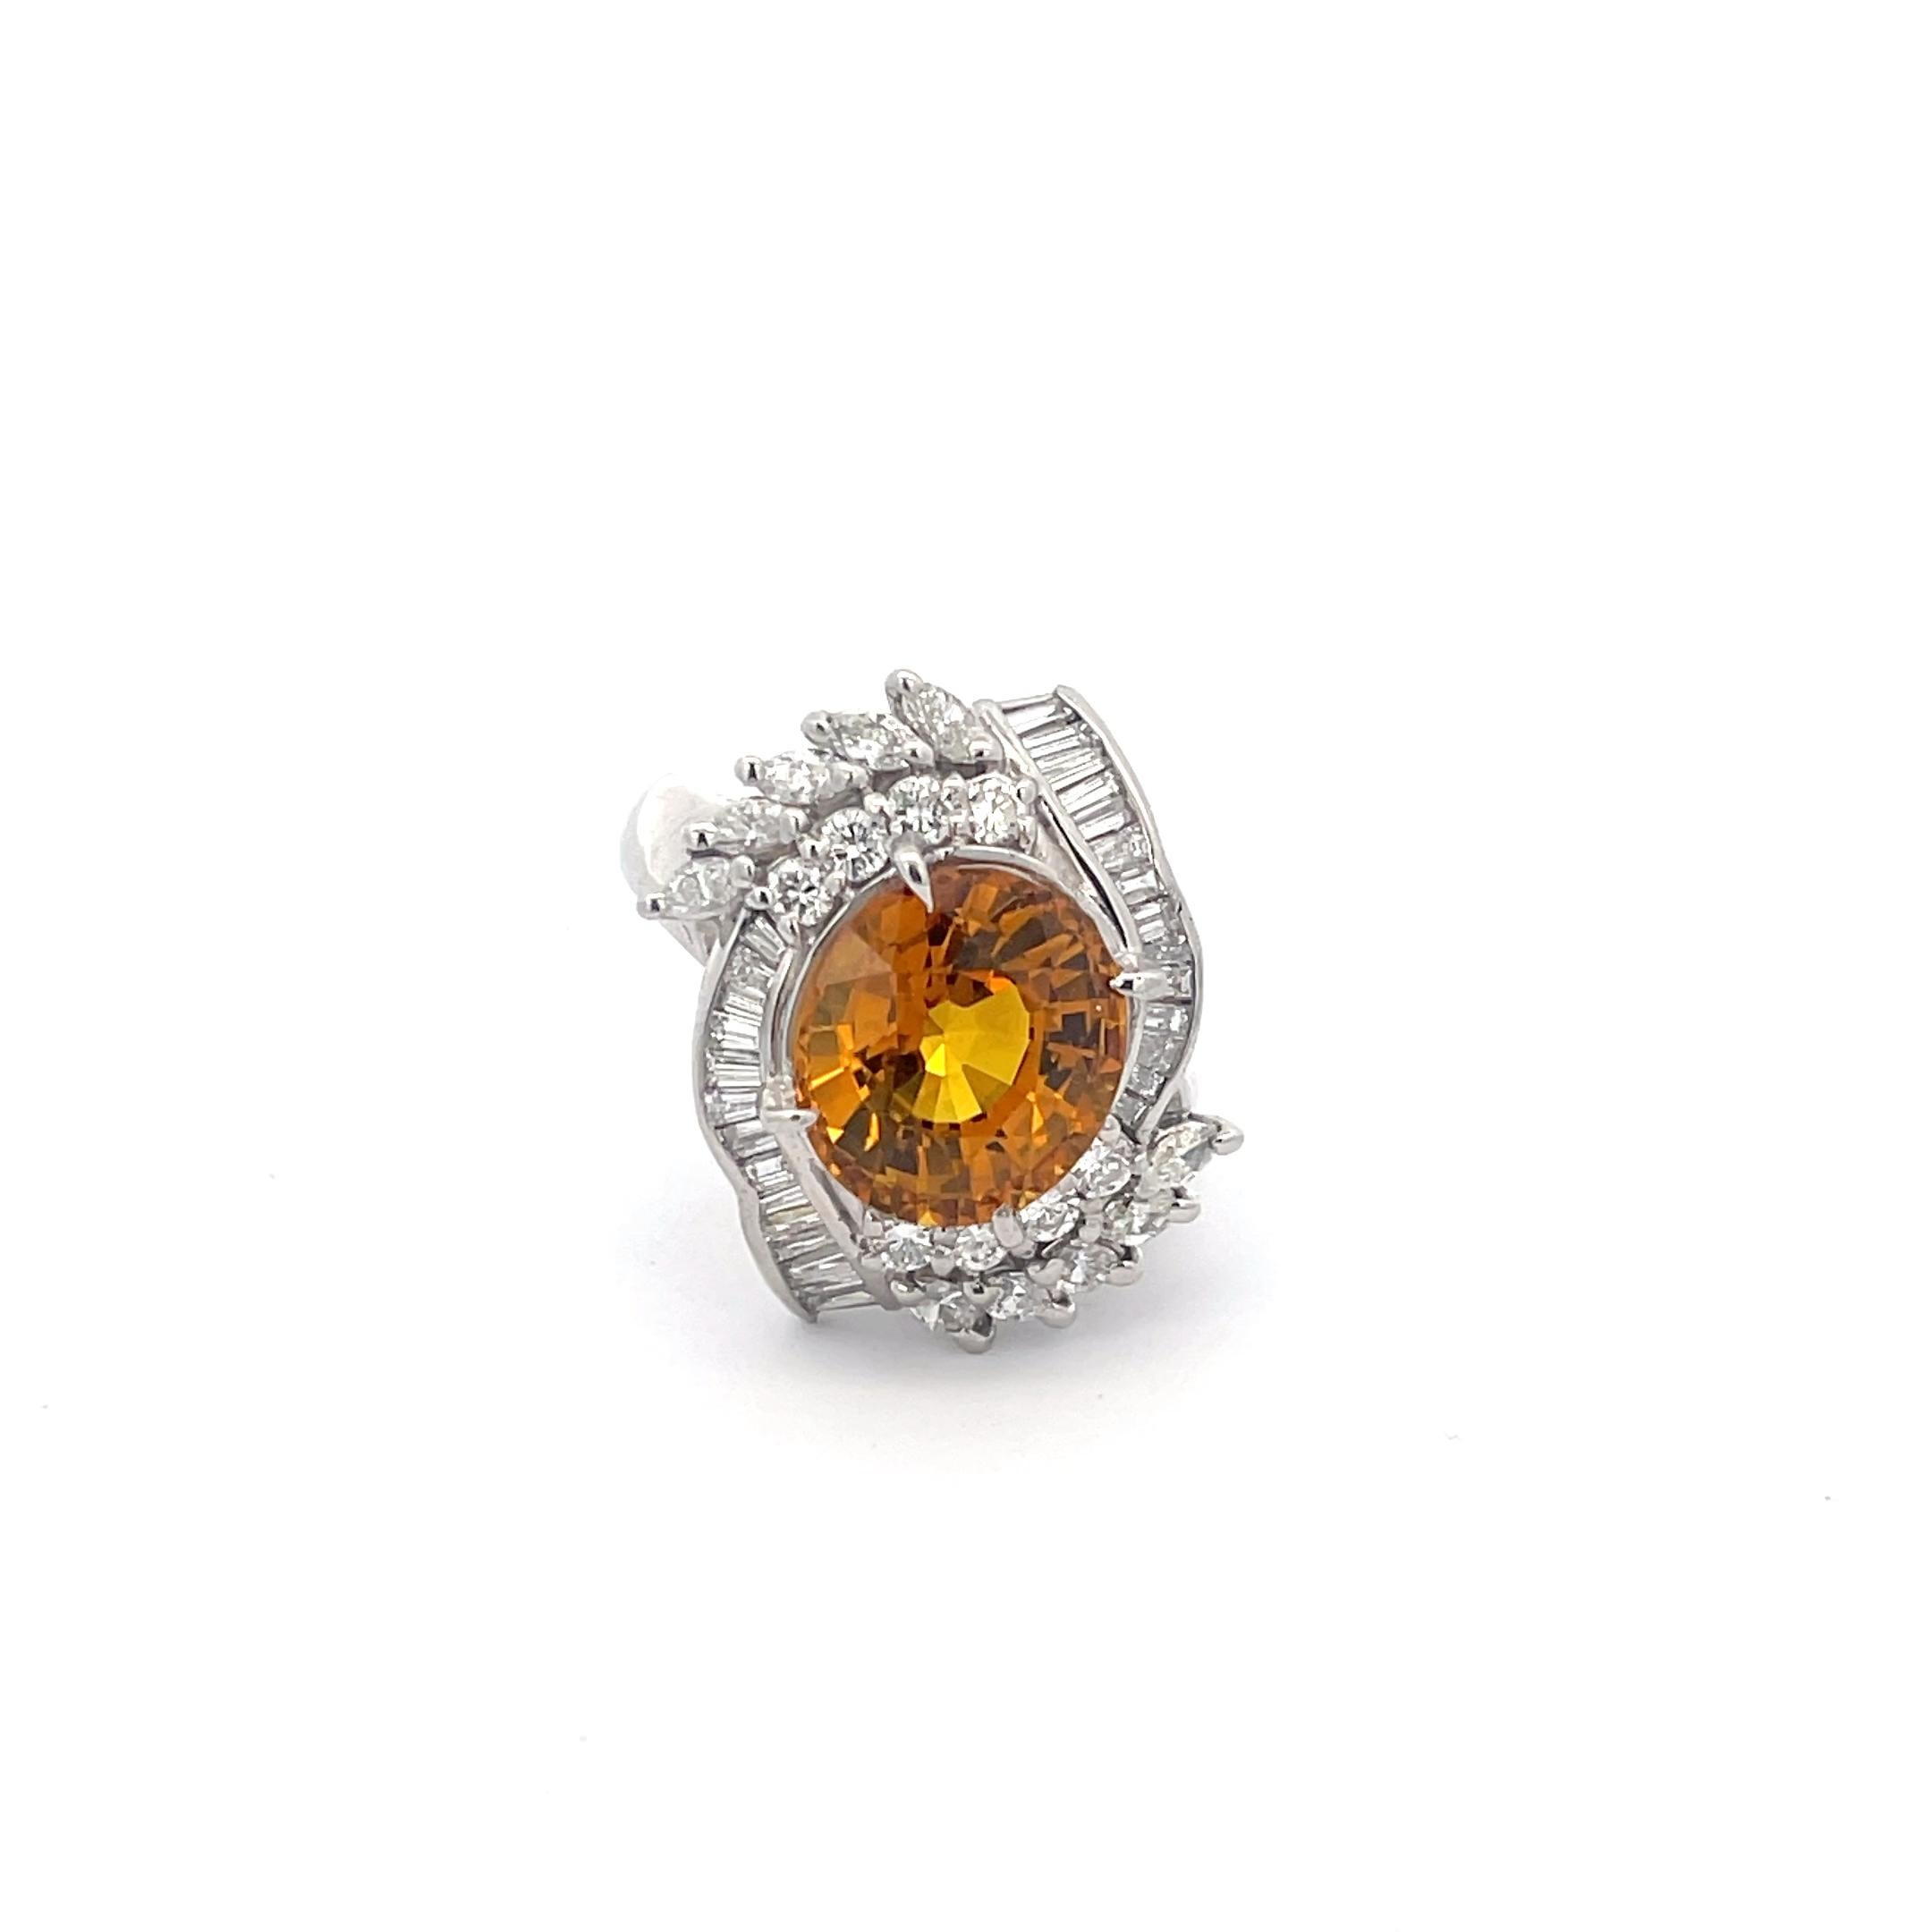 Orange Sapphire and Diamond Ring in Platinum. The ring features an oval cut 6.46ct sapphire accentuated with 1.16ctw of round, marquise, and baguette cut diamonds. Ring size 6.75 and weighs 12.6 grams.